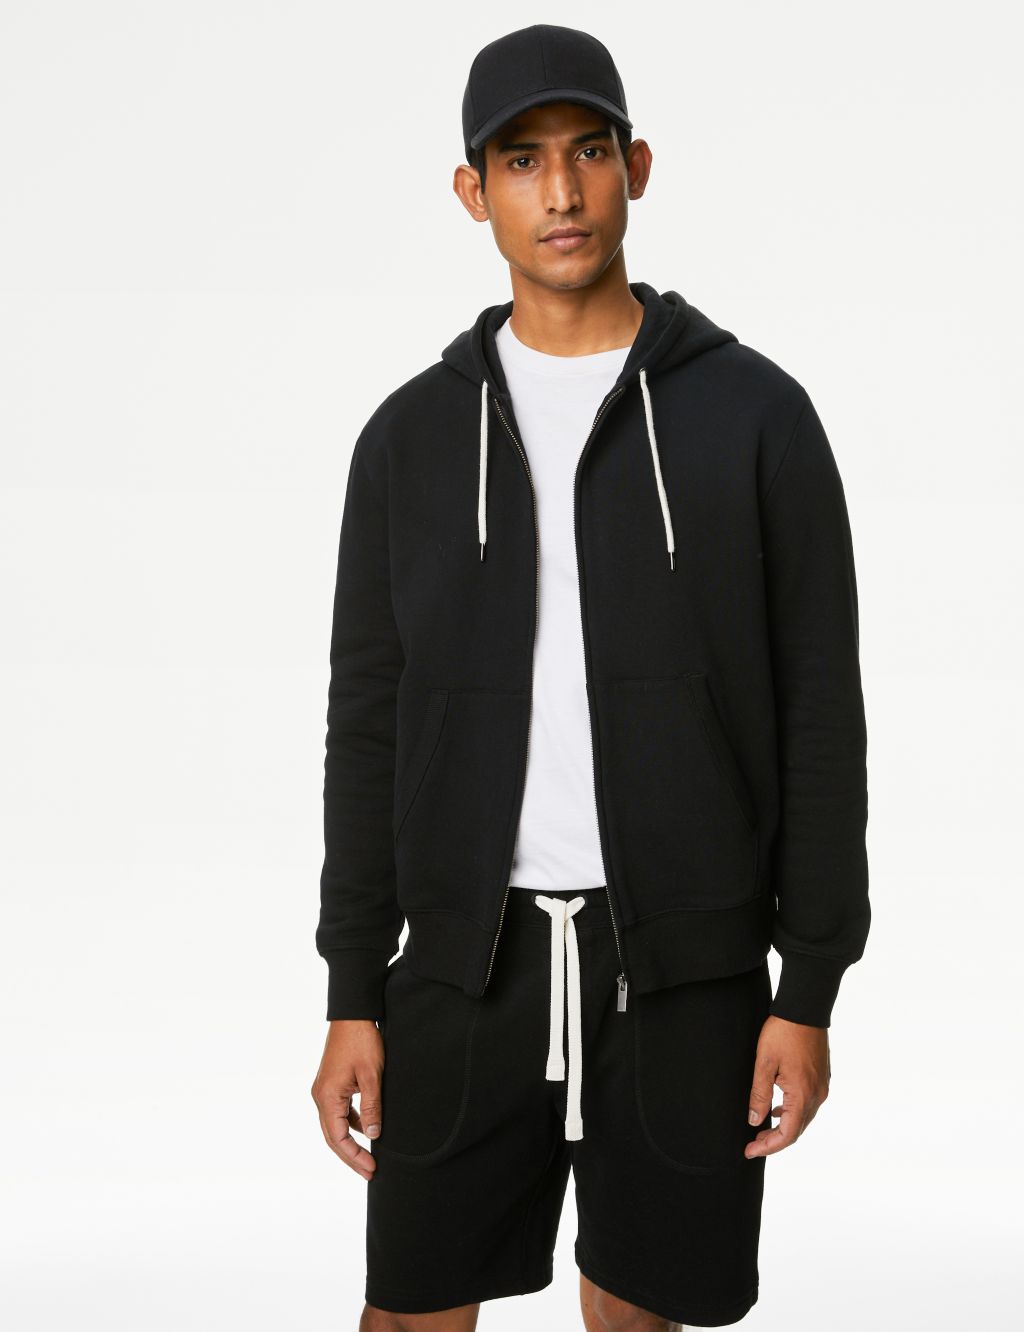 Pure Cotton Hoodie image 1